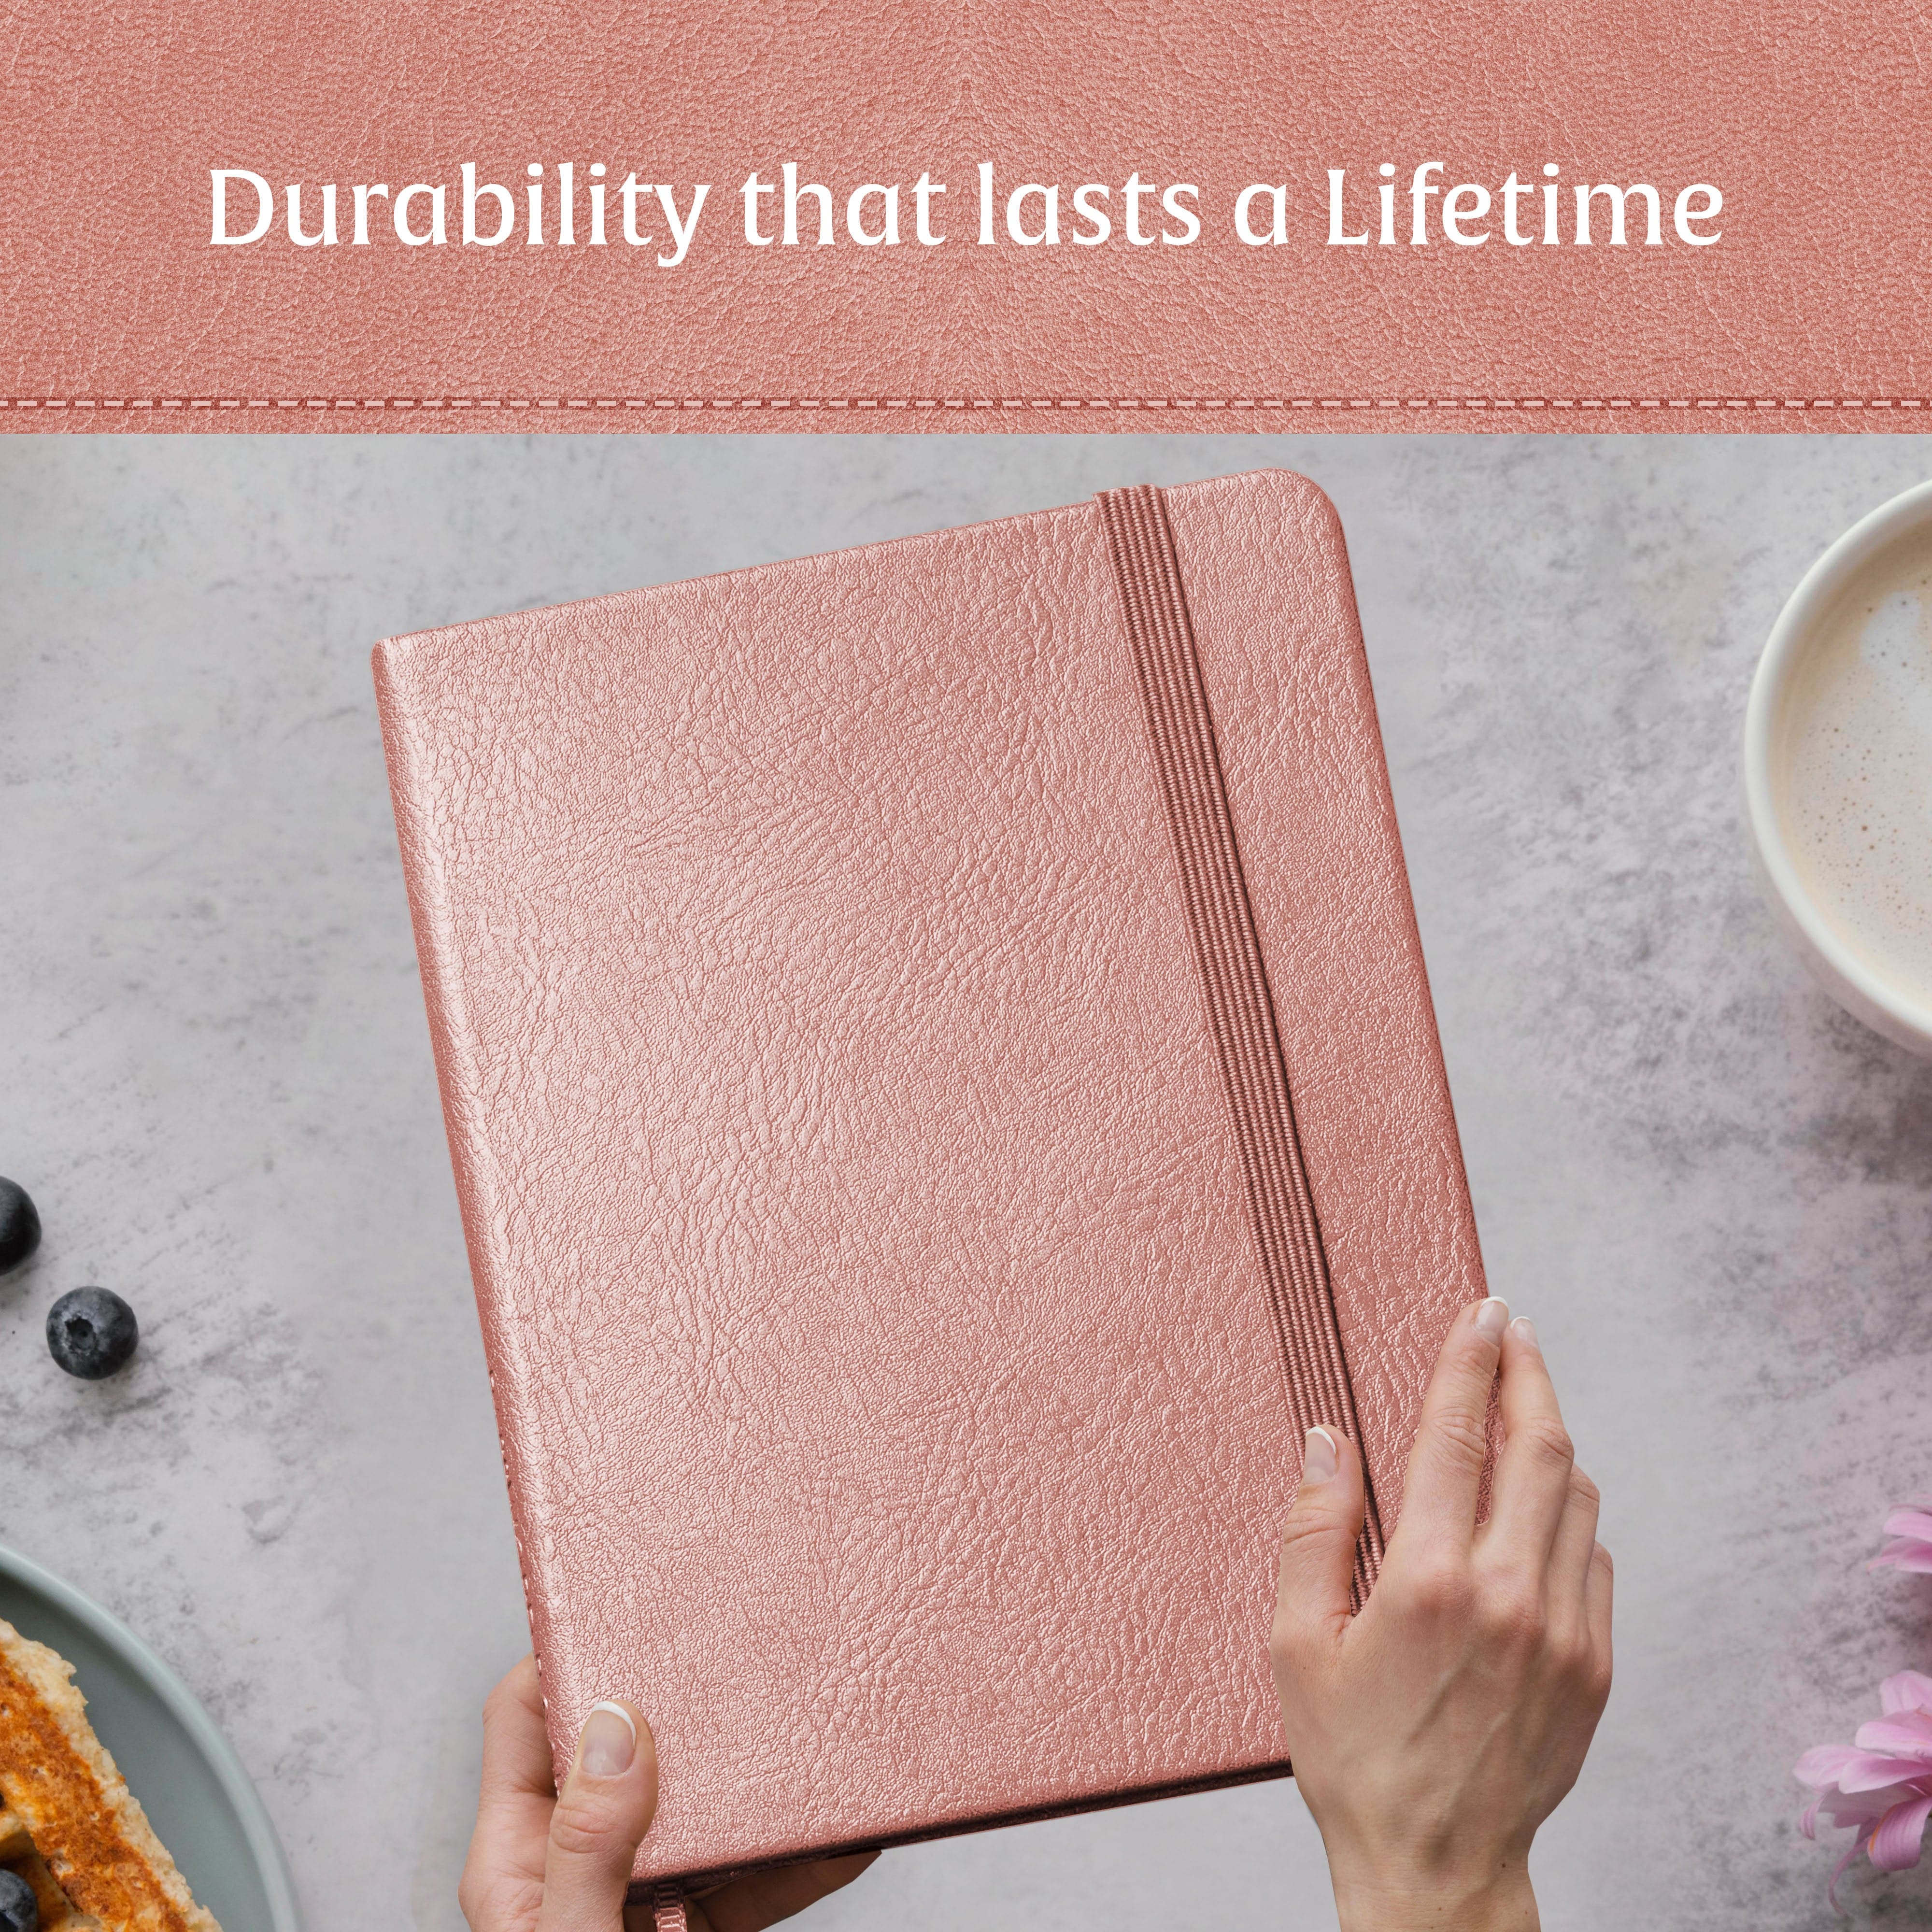 Classic Rose Wood-inspired A4 ruled notebook, blending natural beauty with practicality for daily use.